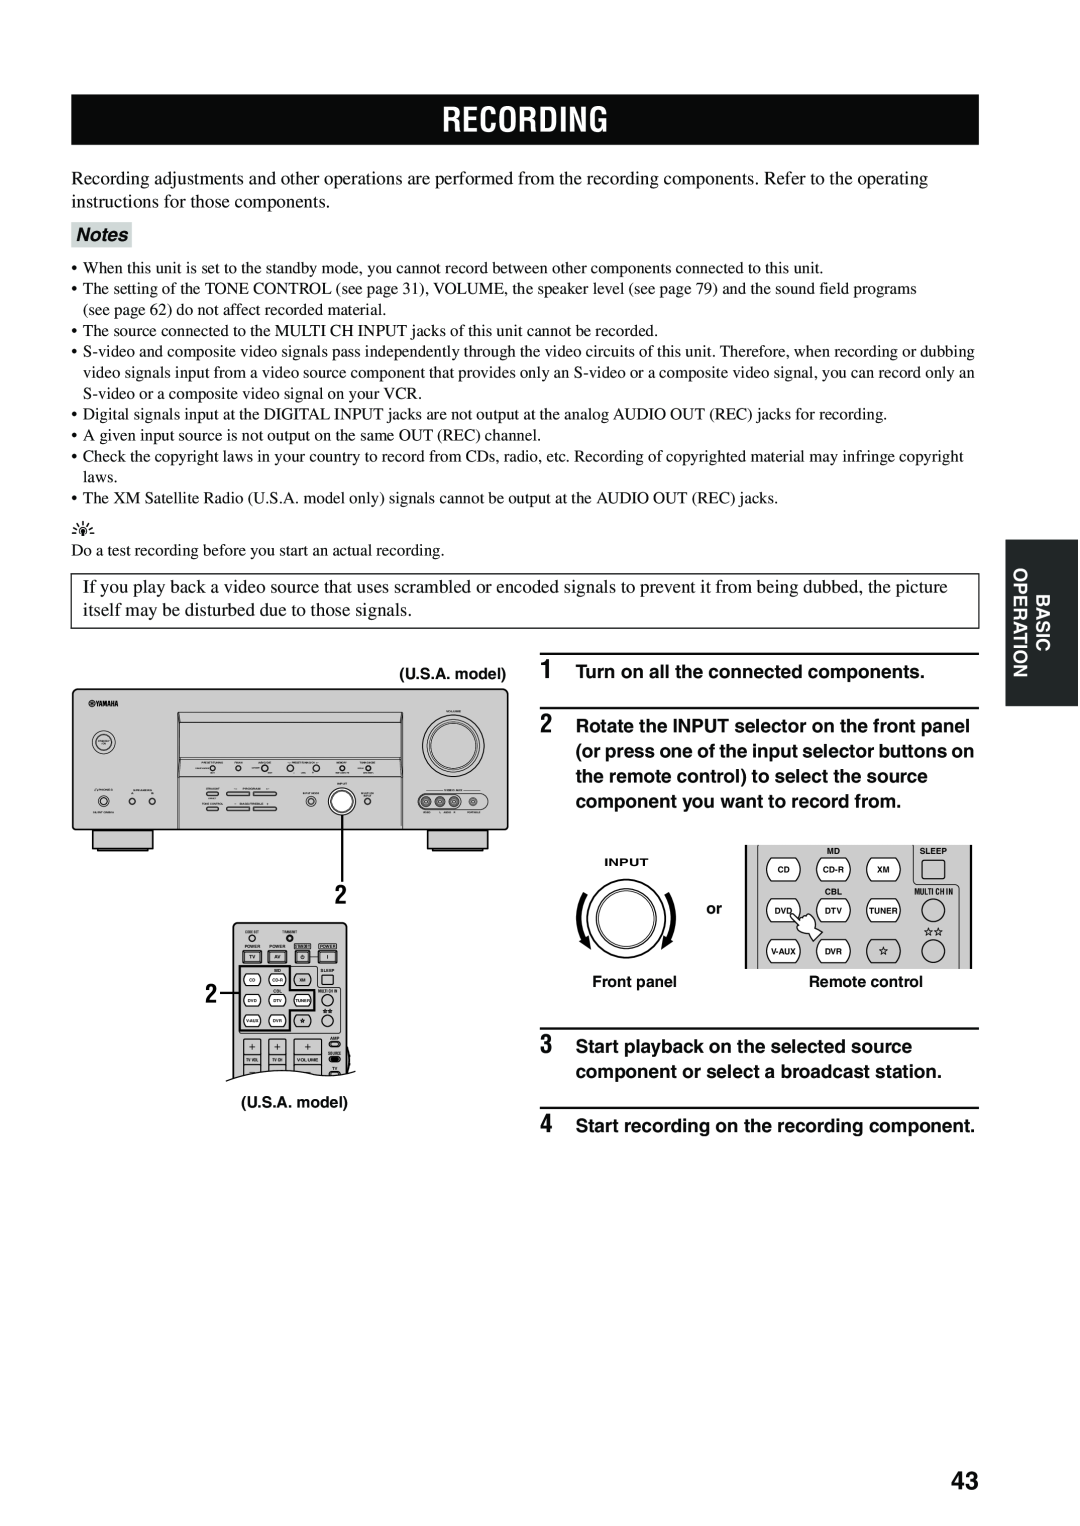 Yamaha HTR-5940 AV Recording, Turn on all the connected components, Rotate the INPUT selector on the front panel 